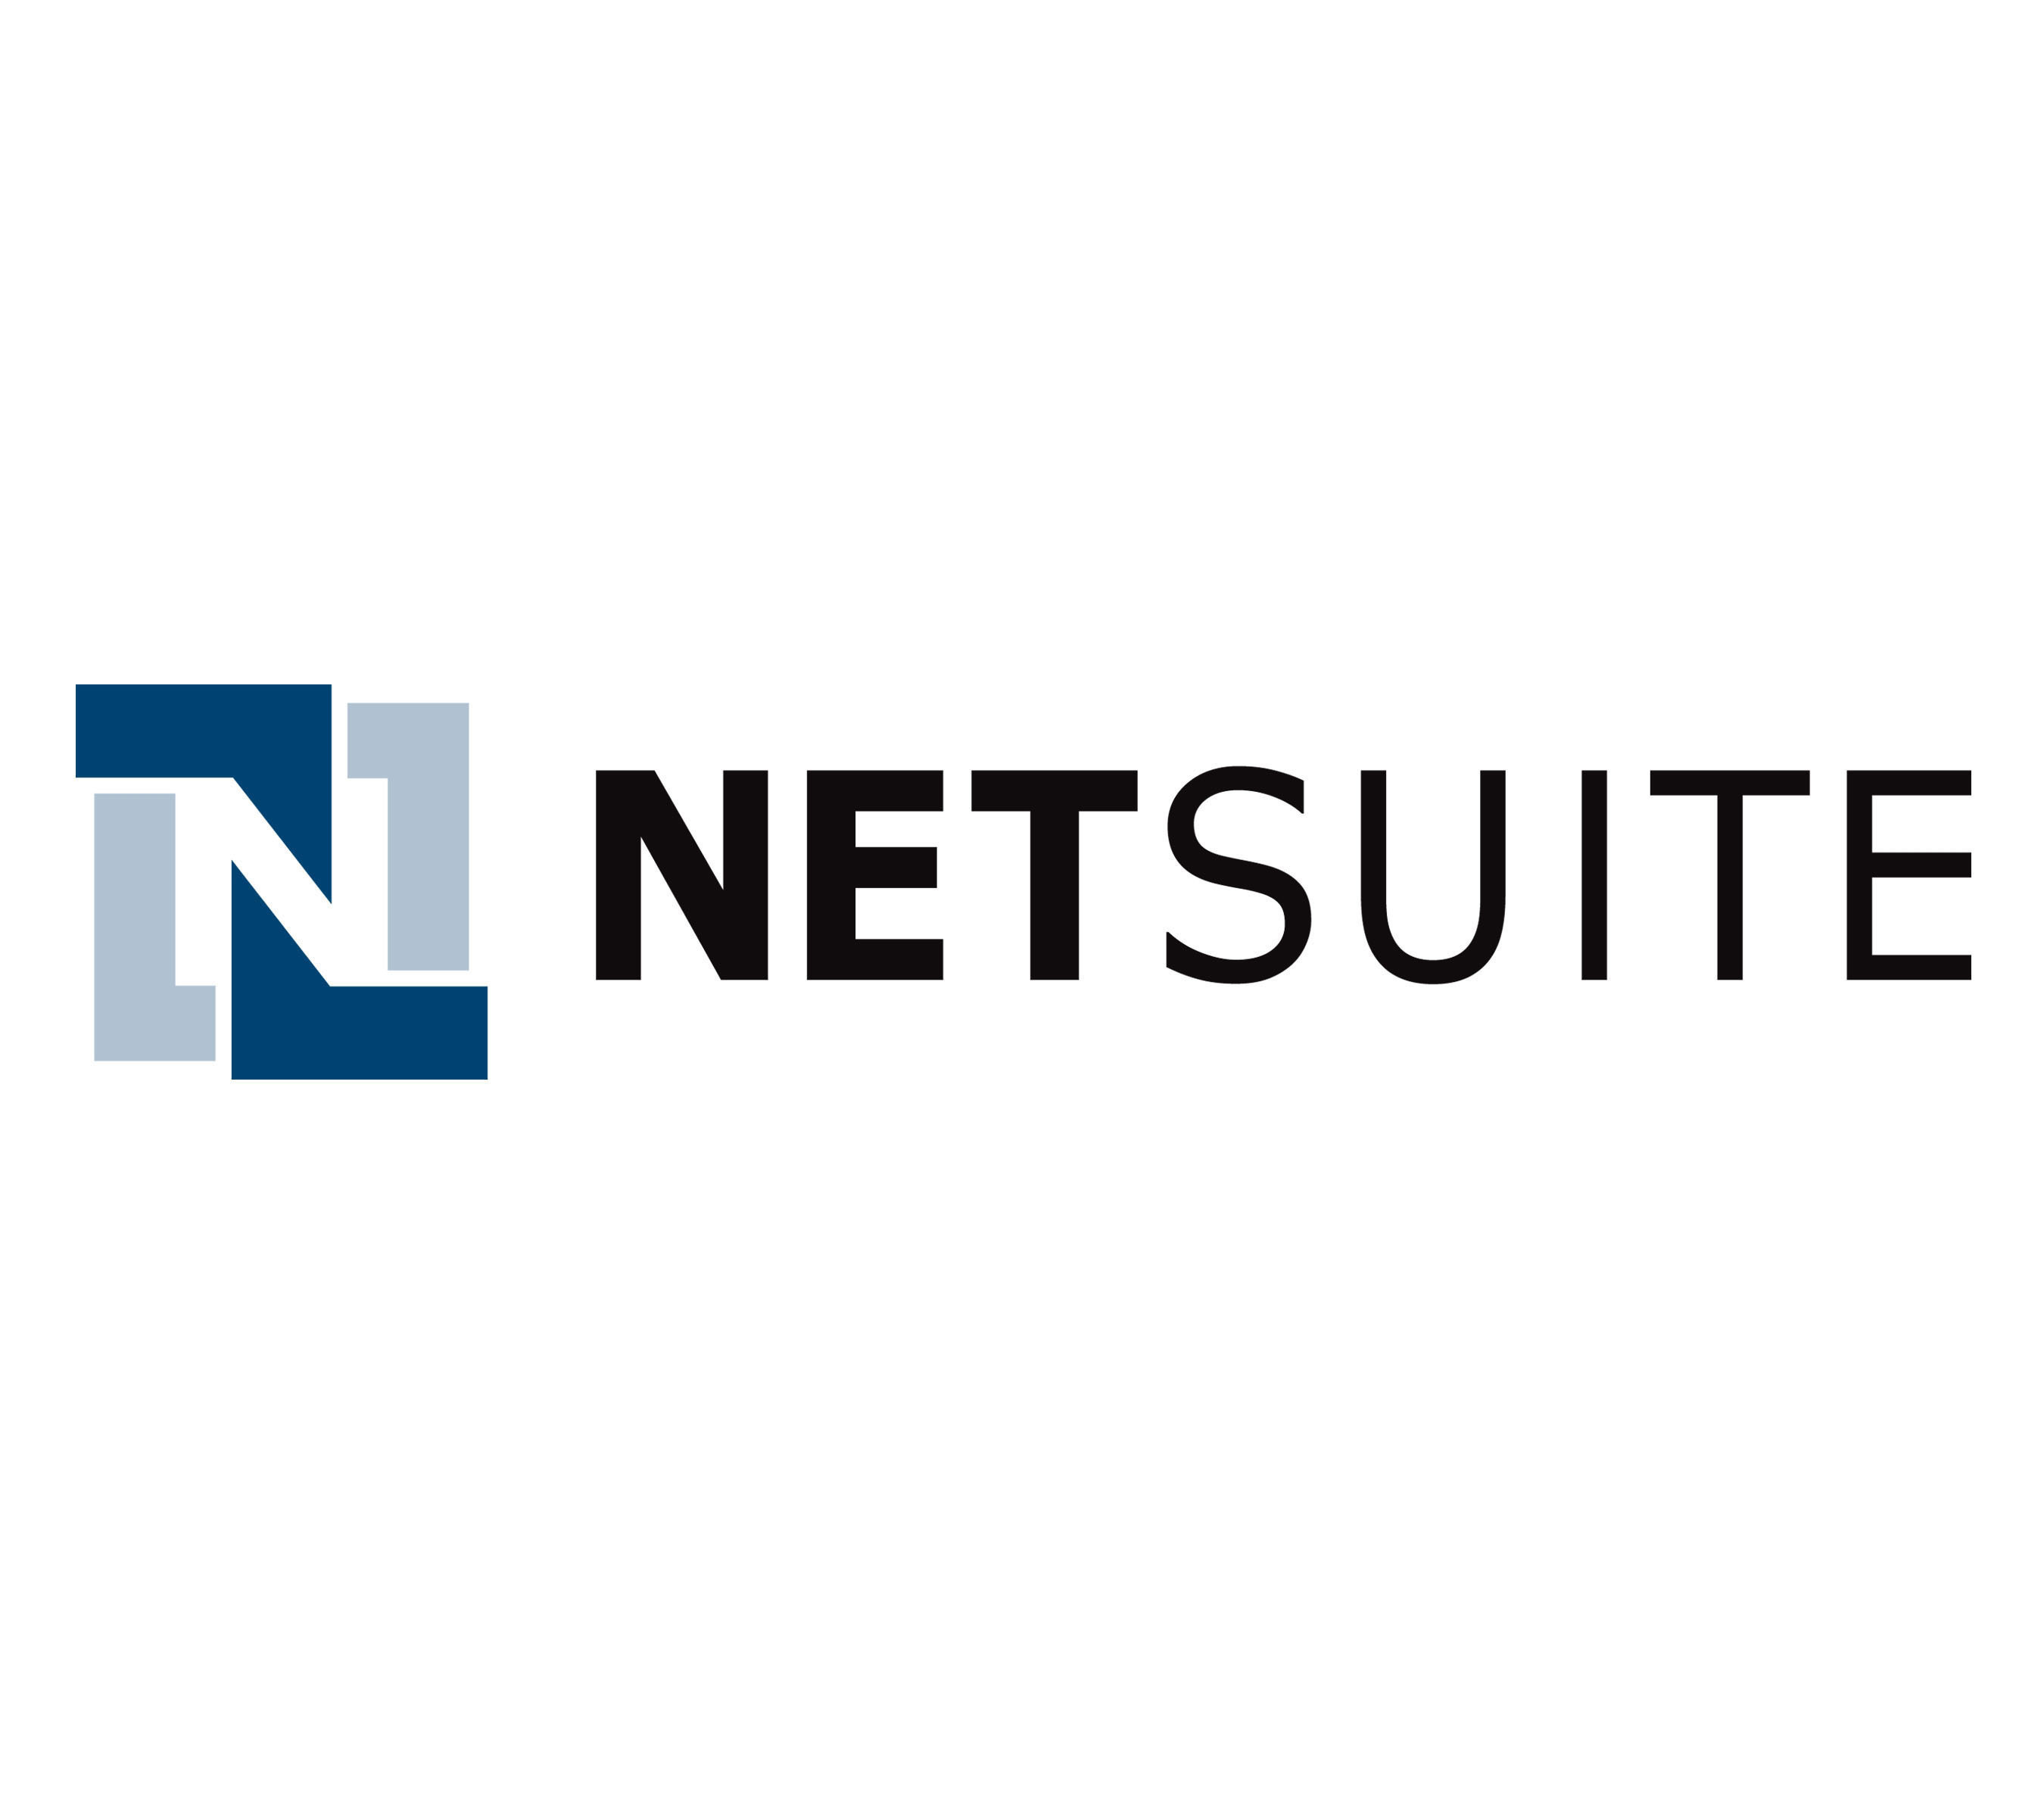 NetSuite. Where Business is Going. (PRNewsFoto/NetSuite Inc.)